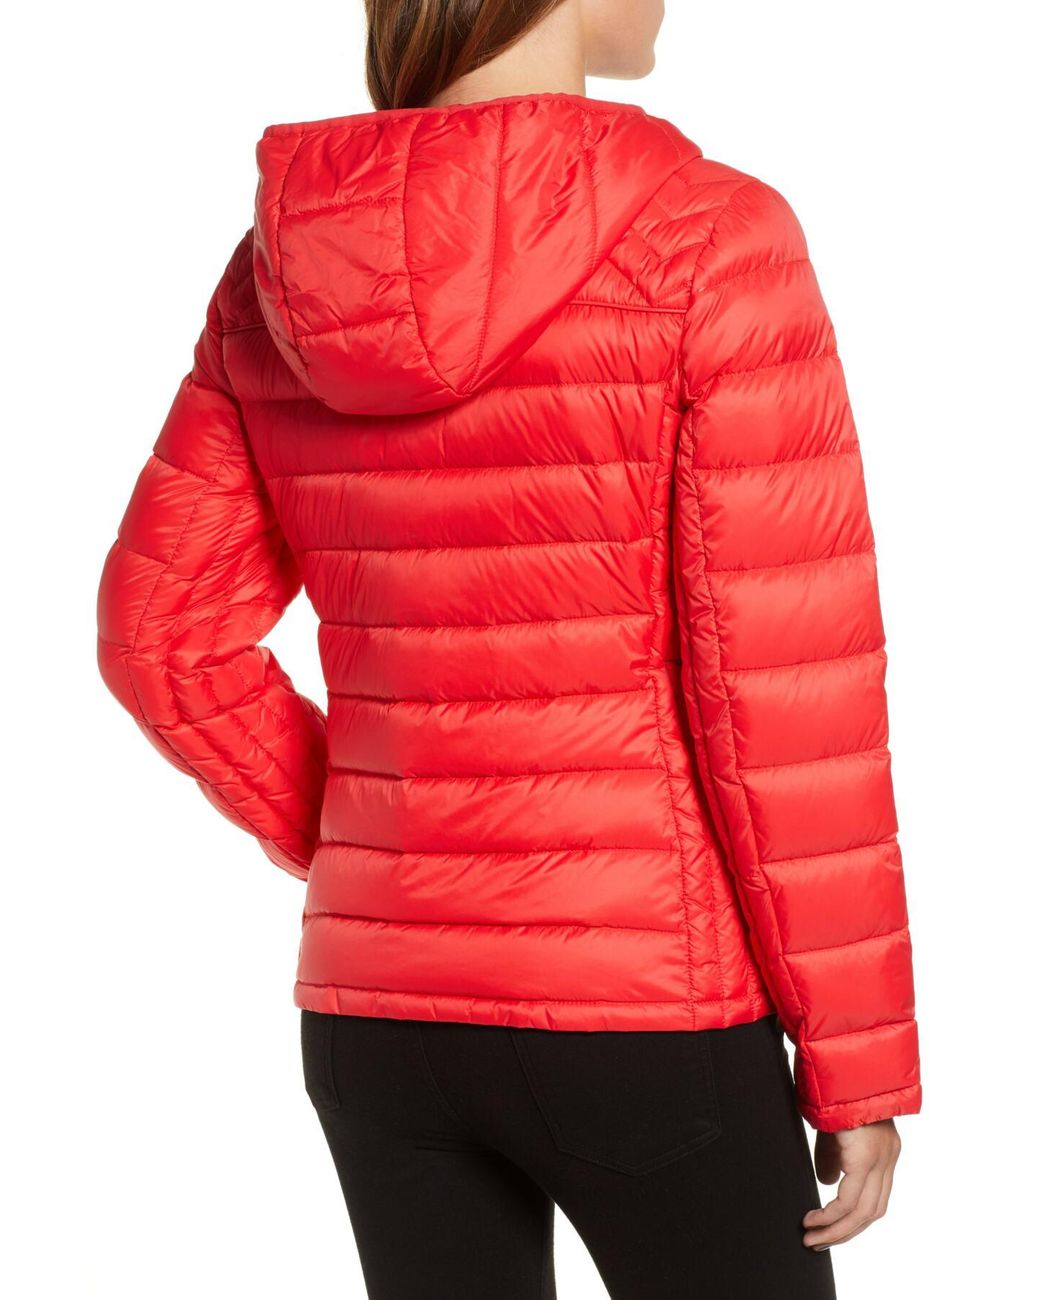 MICHAEL Kors Packable Jacket in Red | Lyst